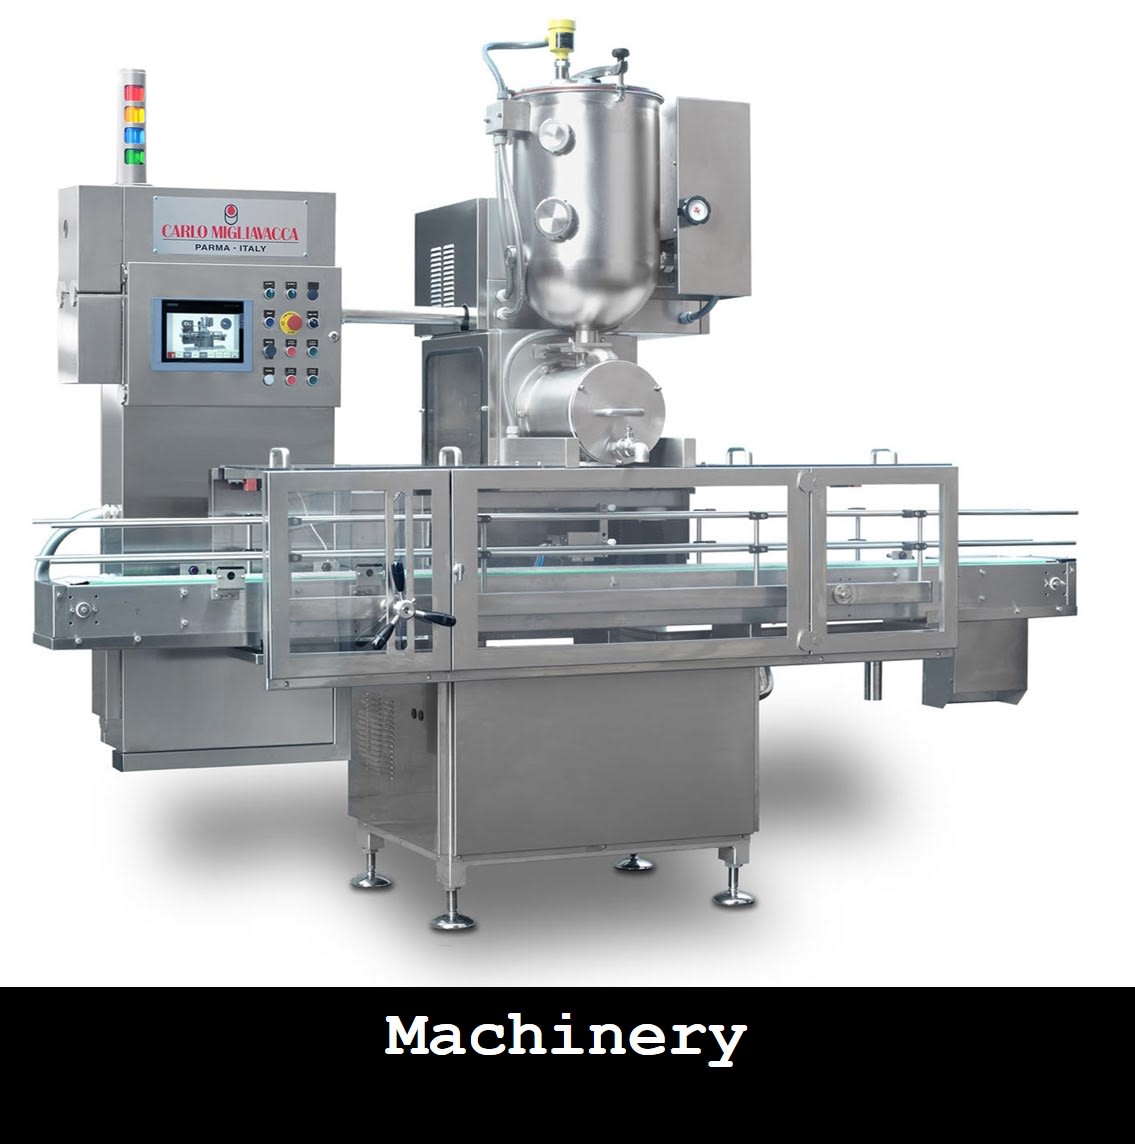 Machinery | Smith Industrial Supply | Port Colborne Industrial Supply